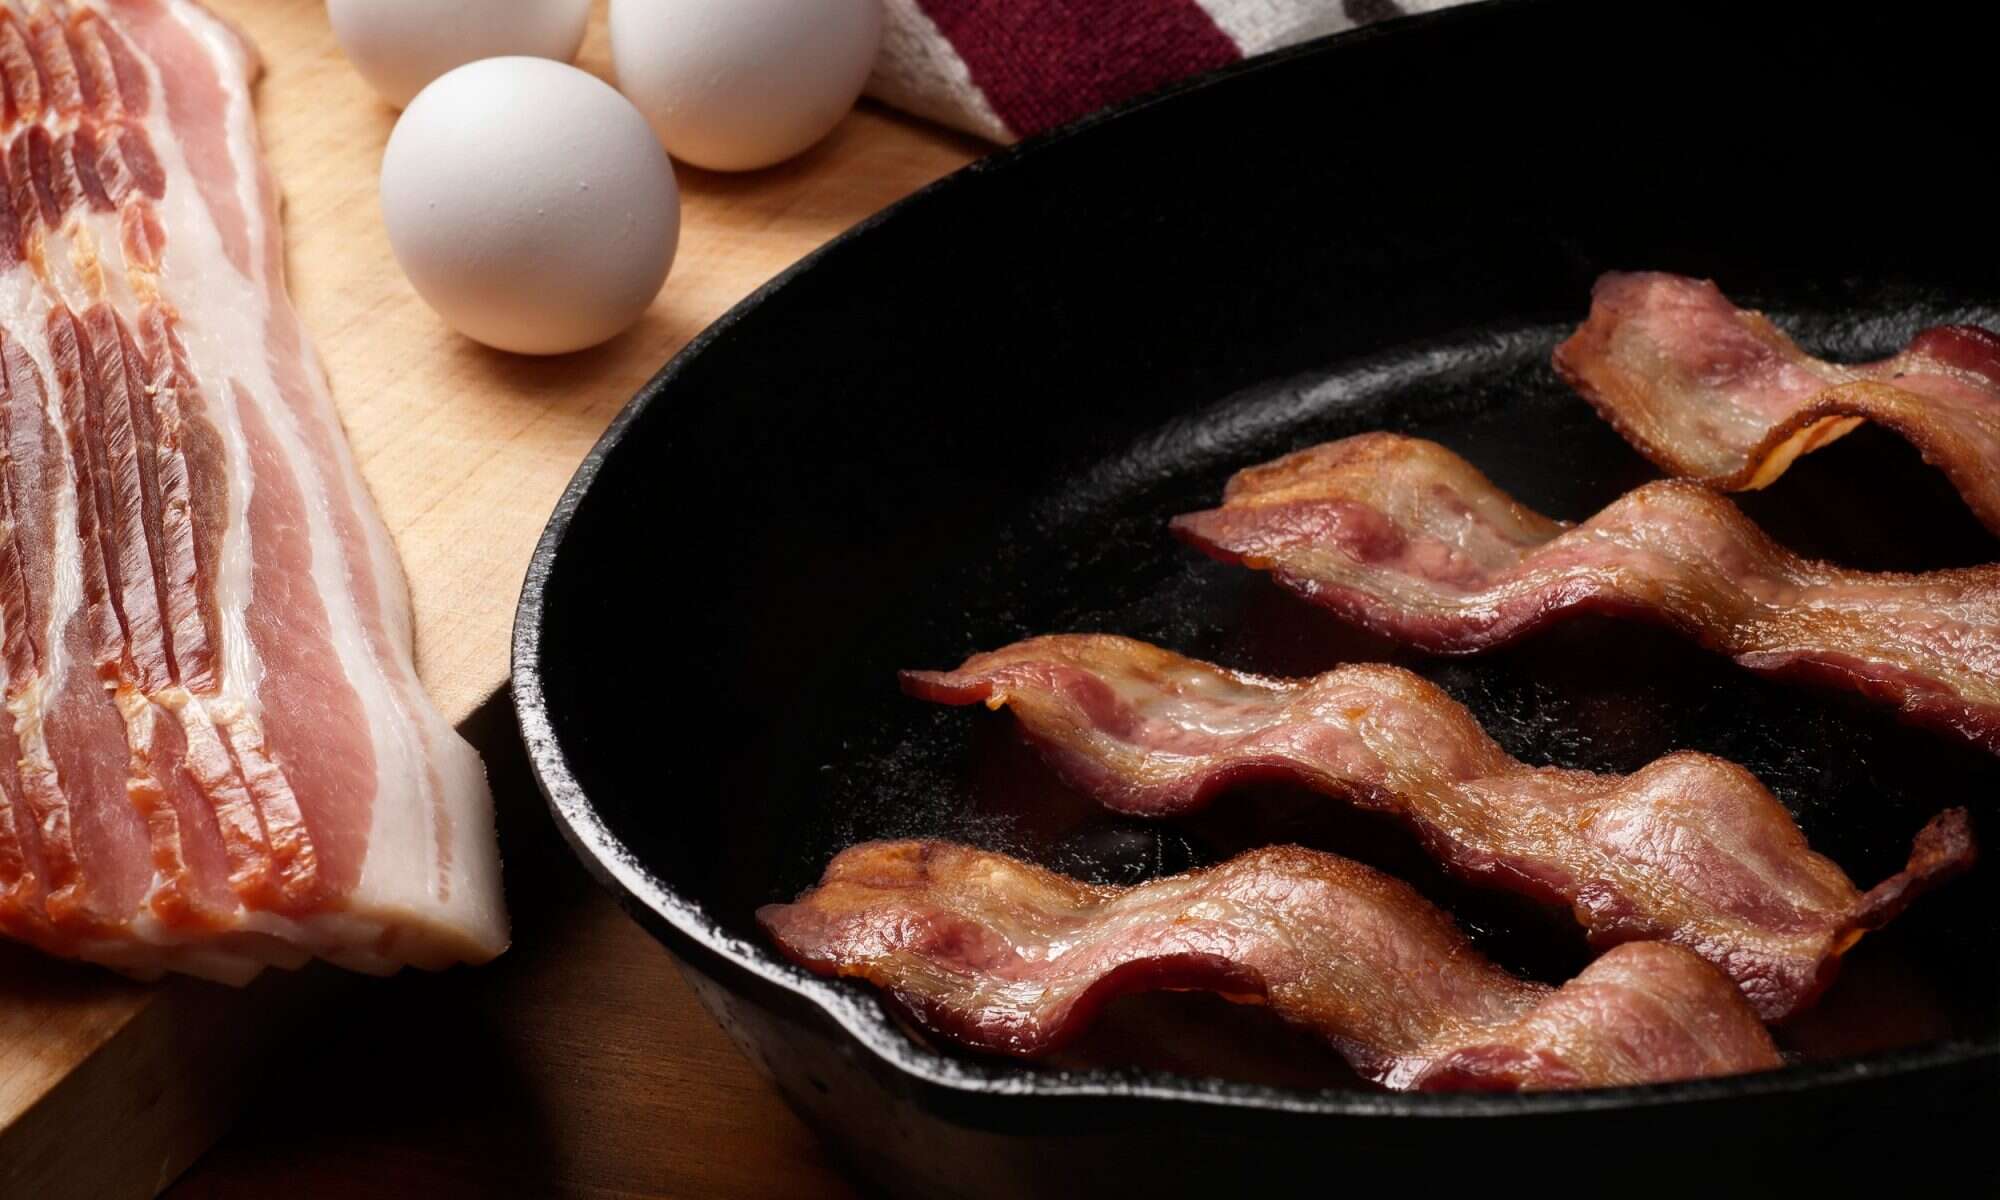 I made BACON Better than Chocolate